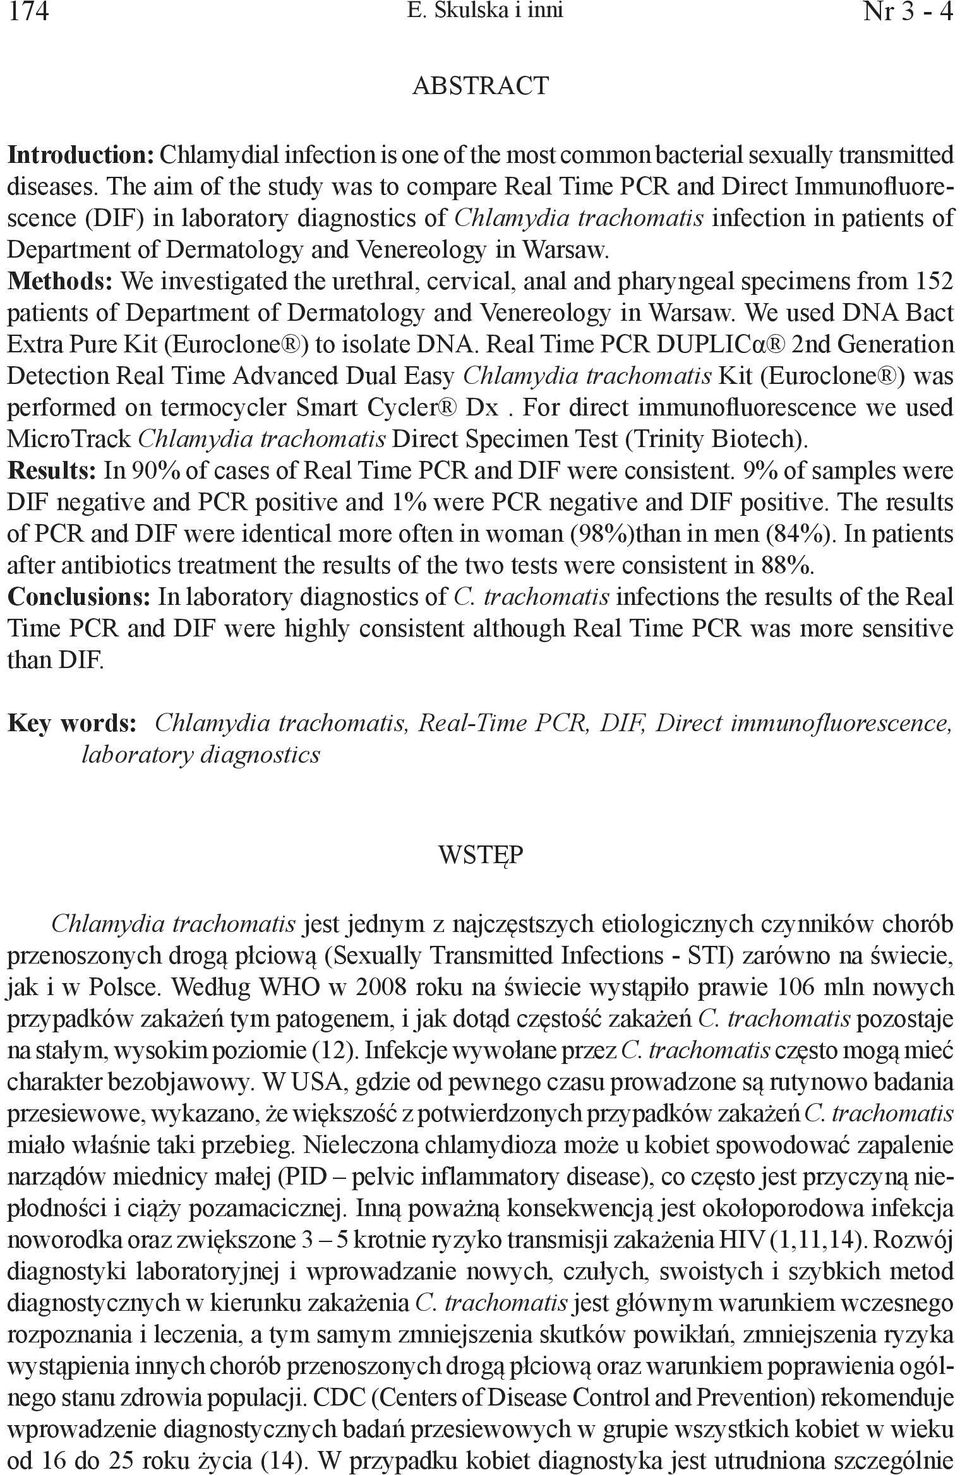 Venereology in Warsaw. Methods: We investigated the urethral, cervical, anal and pharyngeal specimens from 152 patients of Department of Dermatology and Venereology in Warsaw.